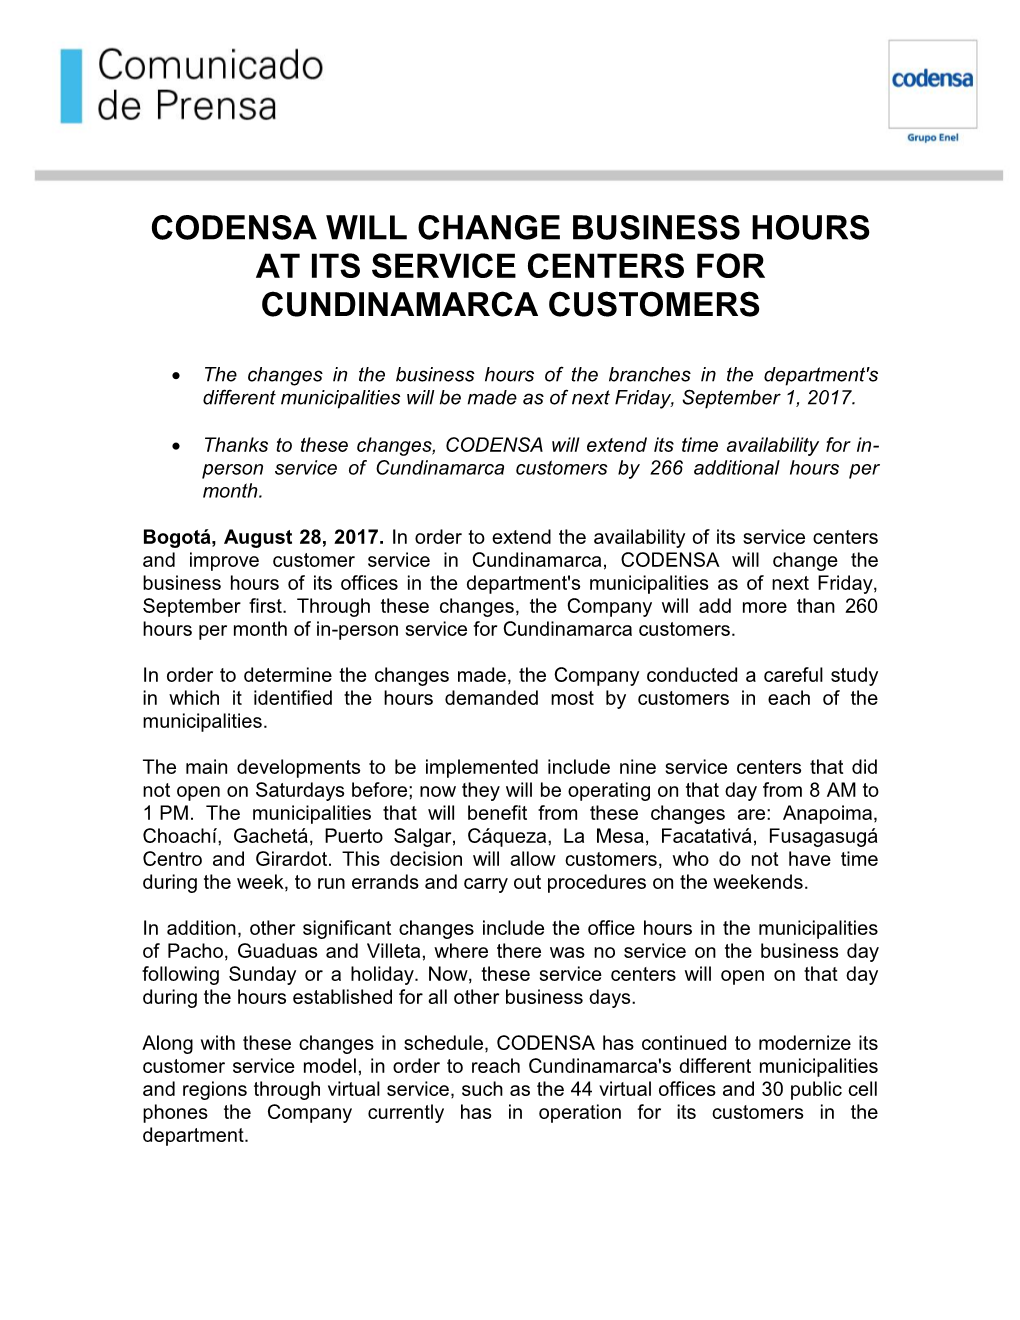 Codensa Will Change Business Hours at Its Service Centers for Cundinamarca Customers